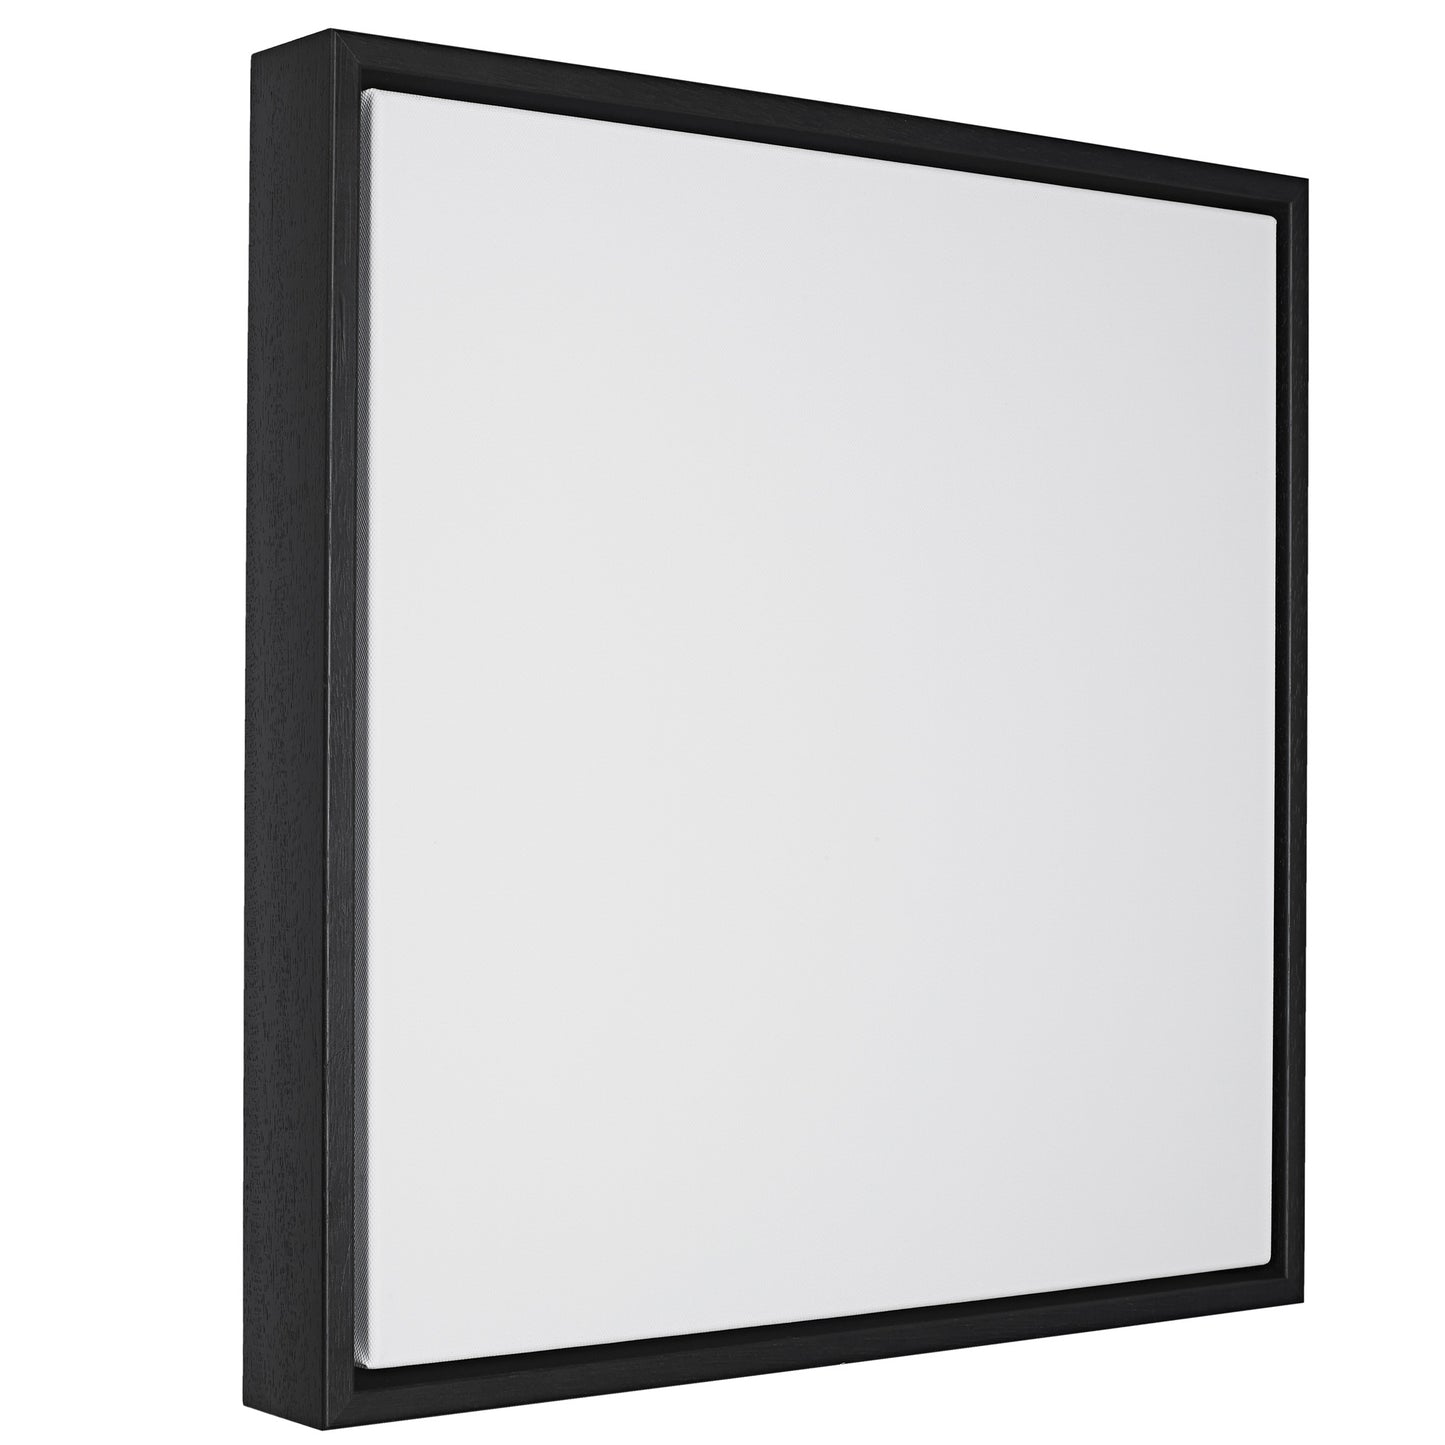 Square shaped, white canvas with floating black wooden frame photographed on a plain white background.